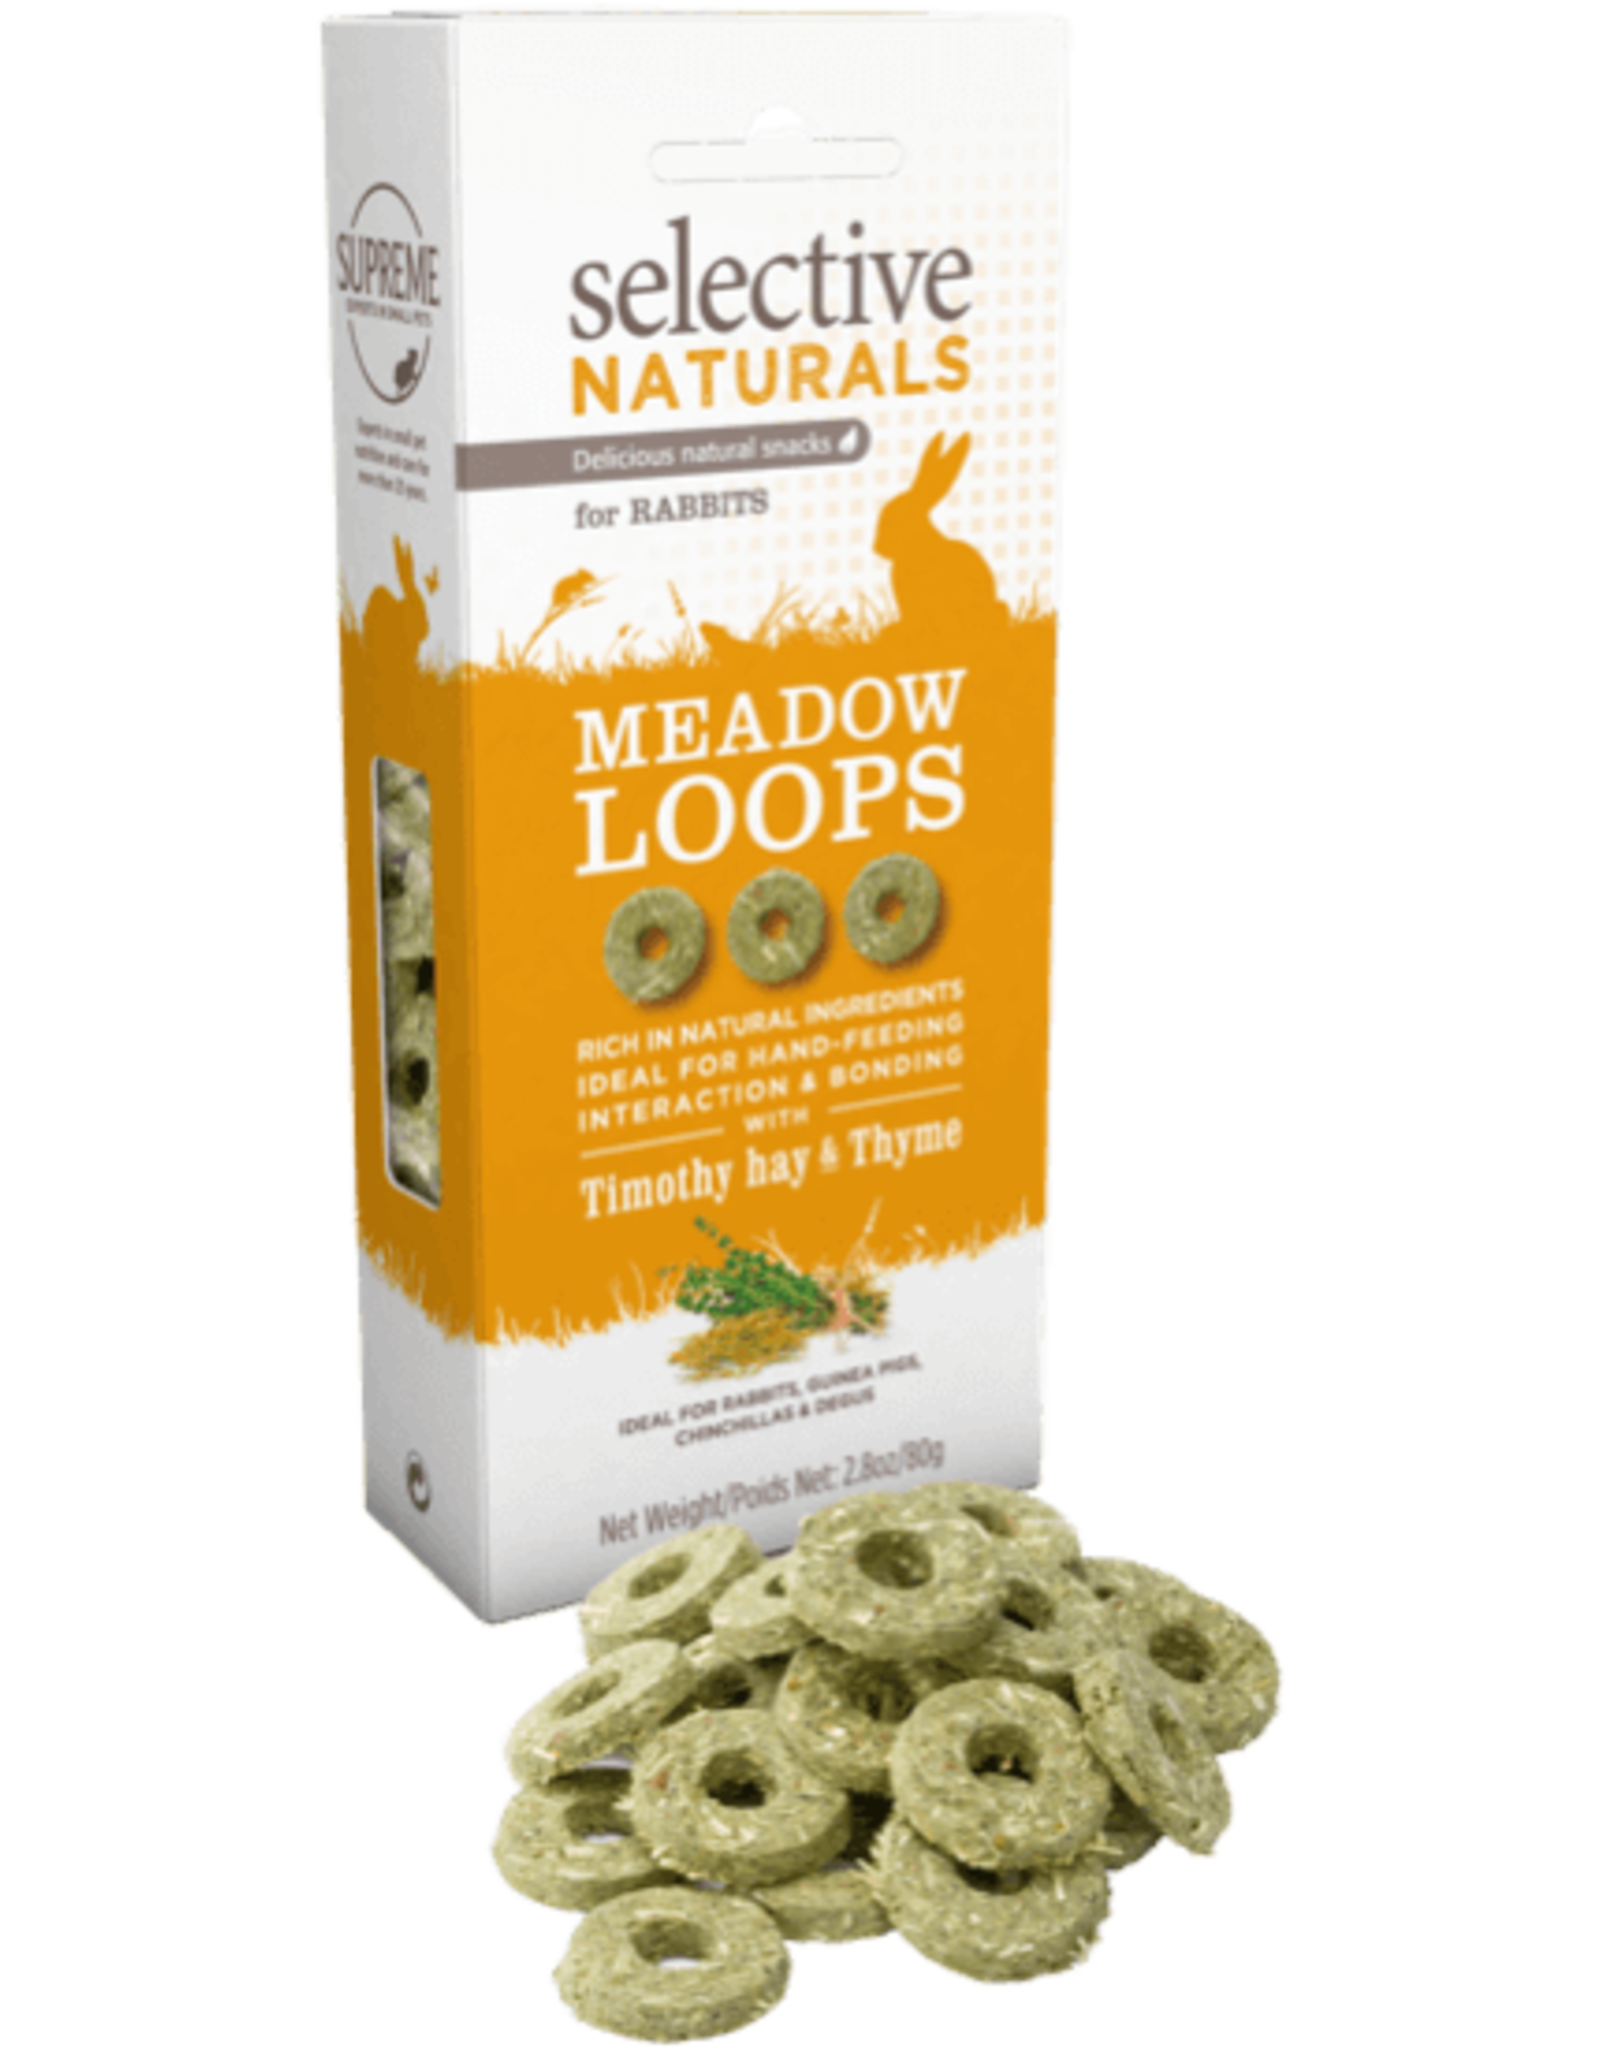 Supreme Pet Foods SELECTIVE NATURALS Meadow Loops Rabbit Treats Timothy Hay & Thyme